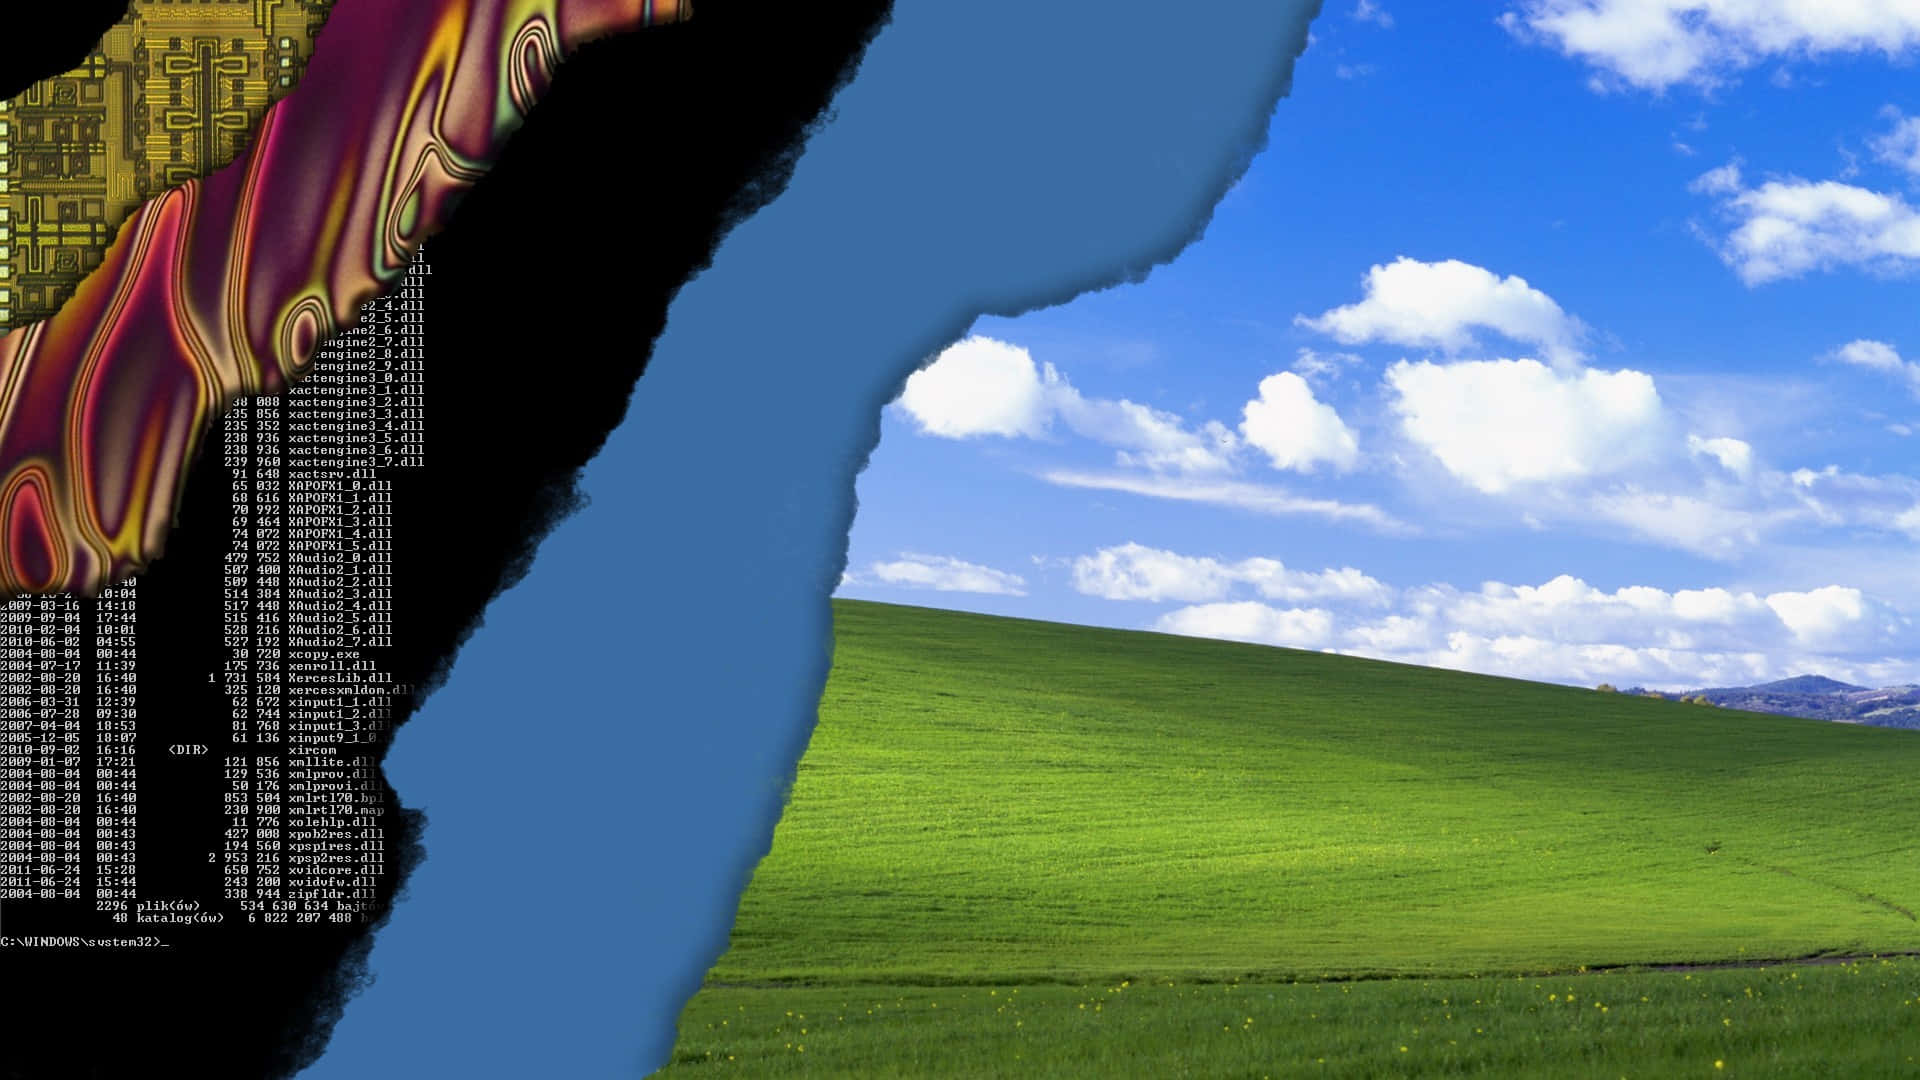 Enjoy the classic experience of Windows XP